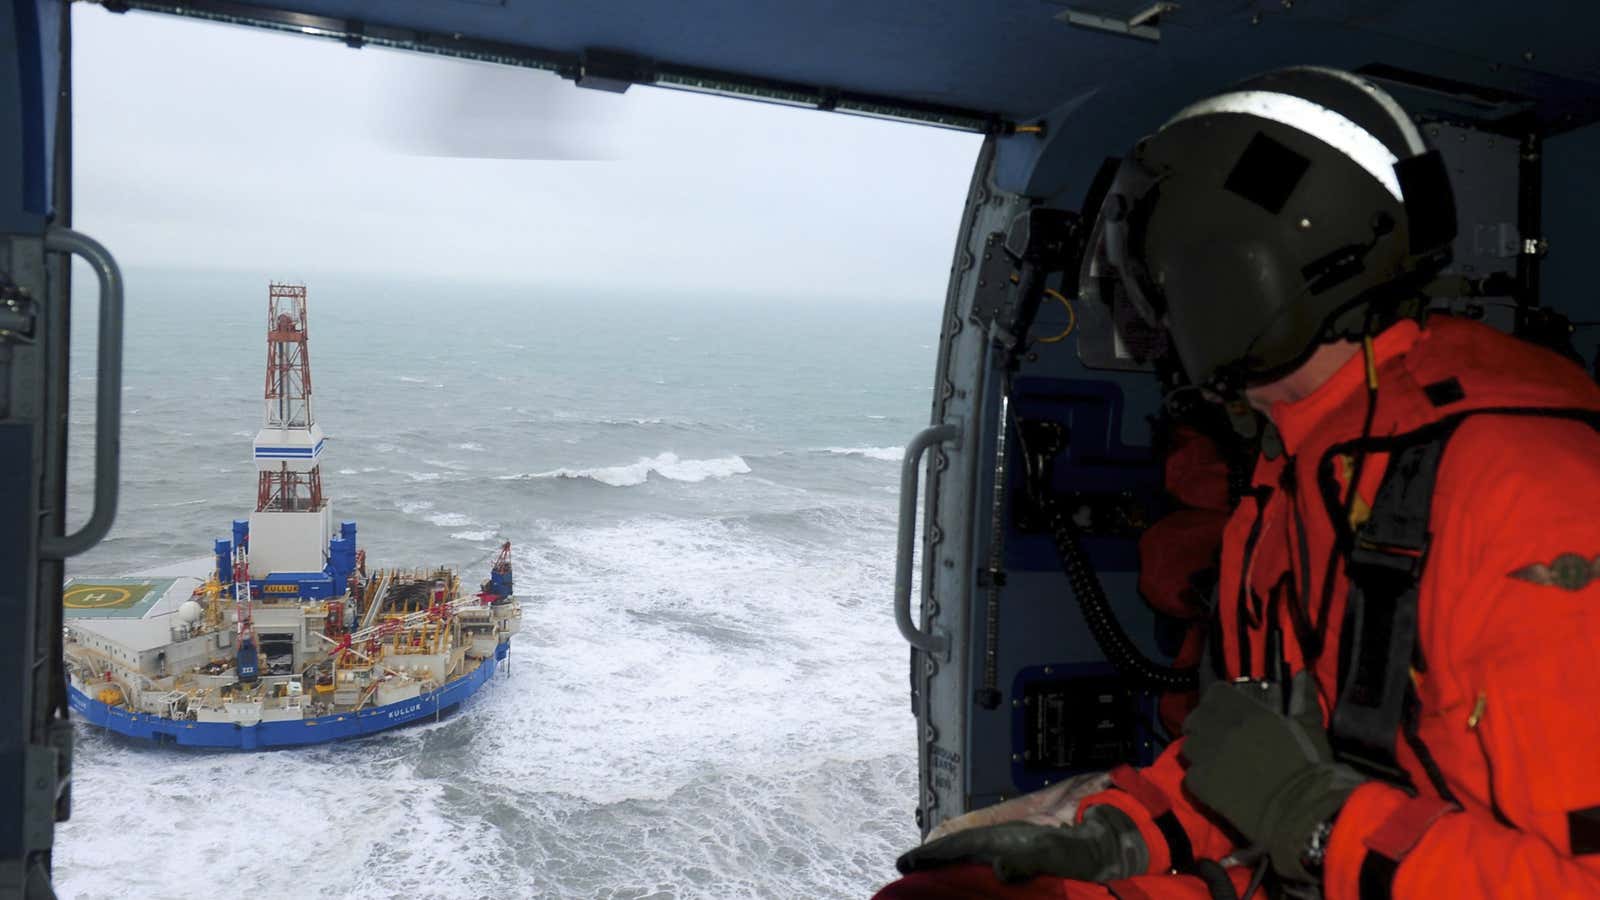 A rescue helicopter approaches the Kulluk rig, owned by Noble and leased by Shell, that ran aground in the Arctic.